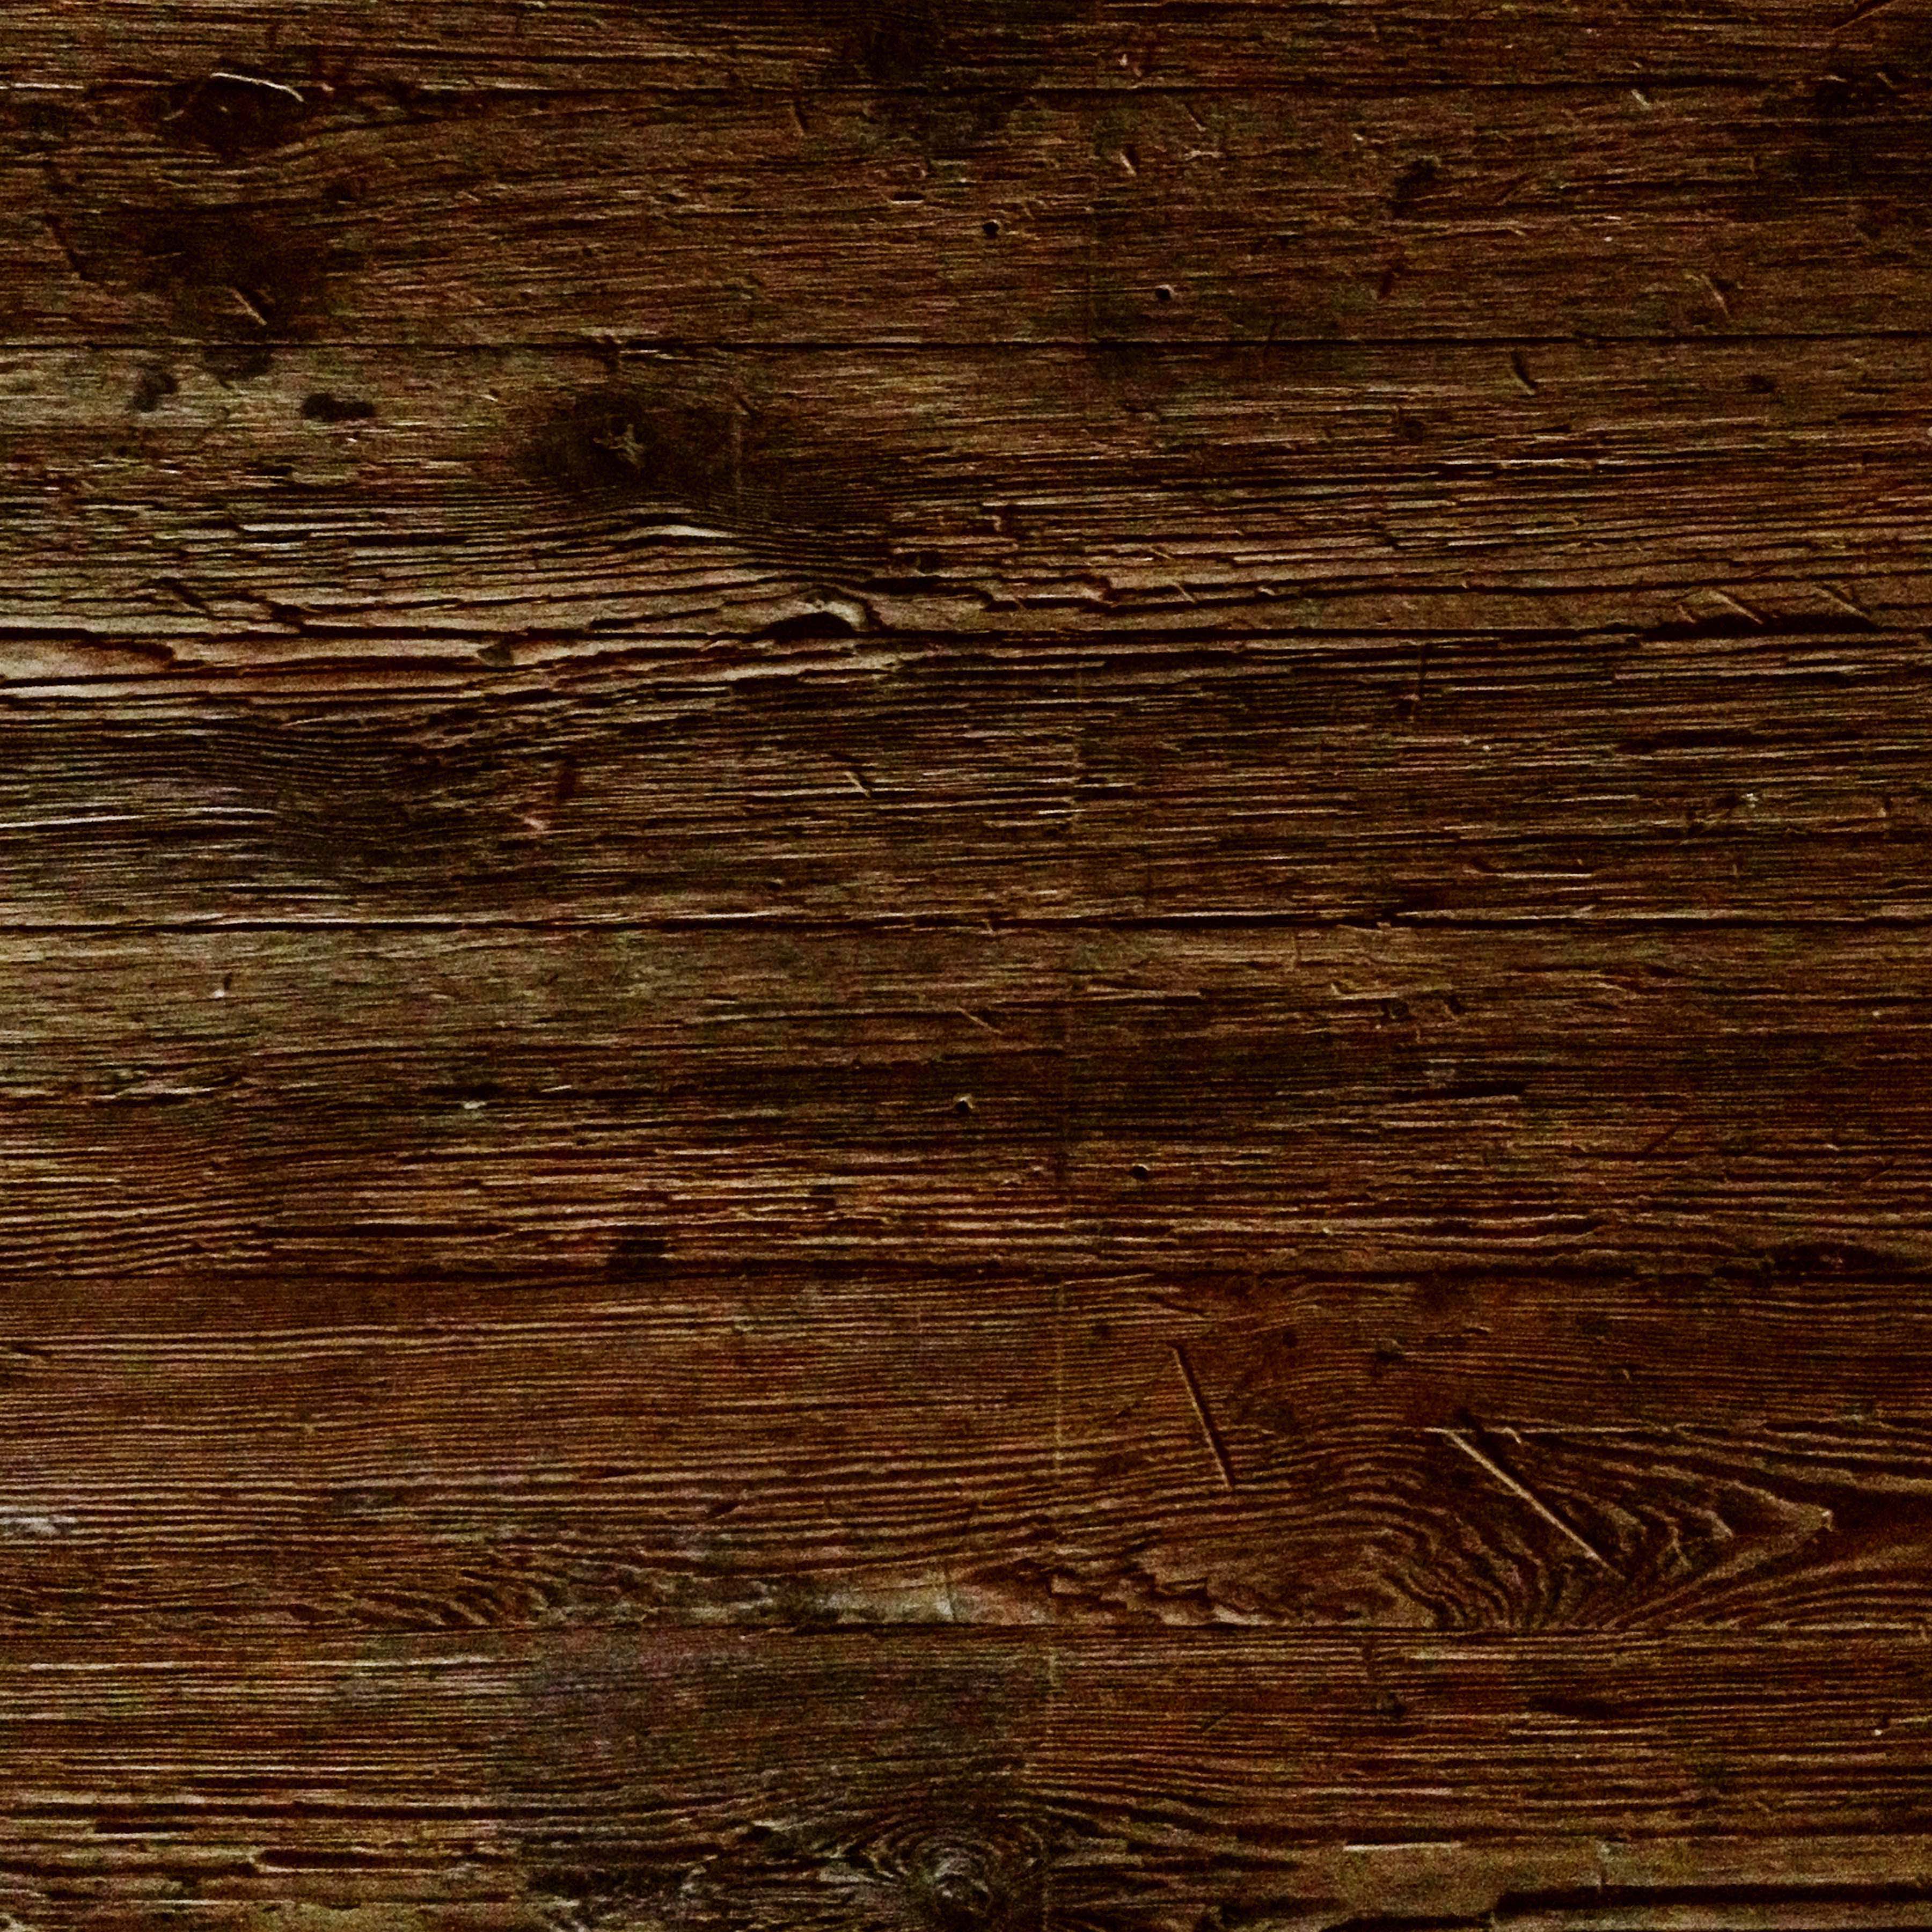 Wood Surface